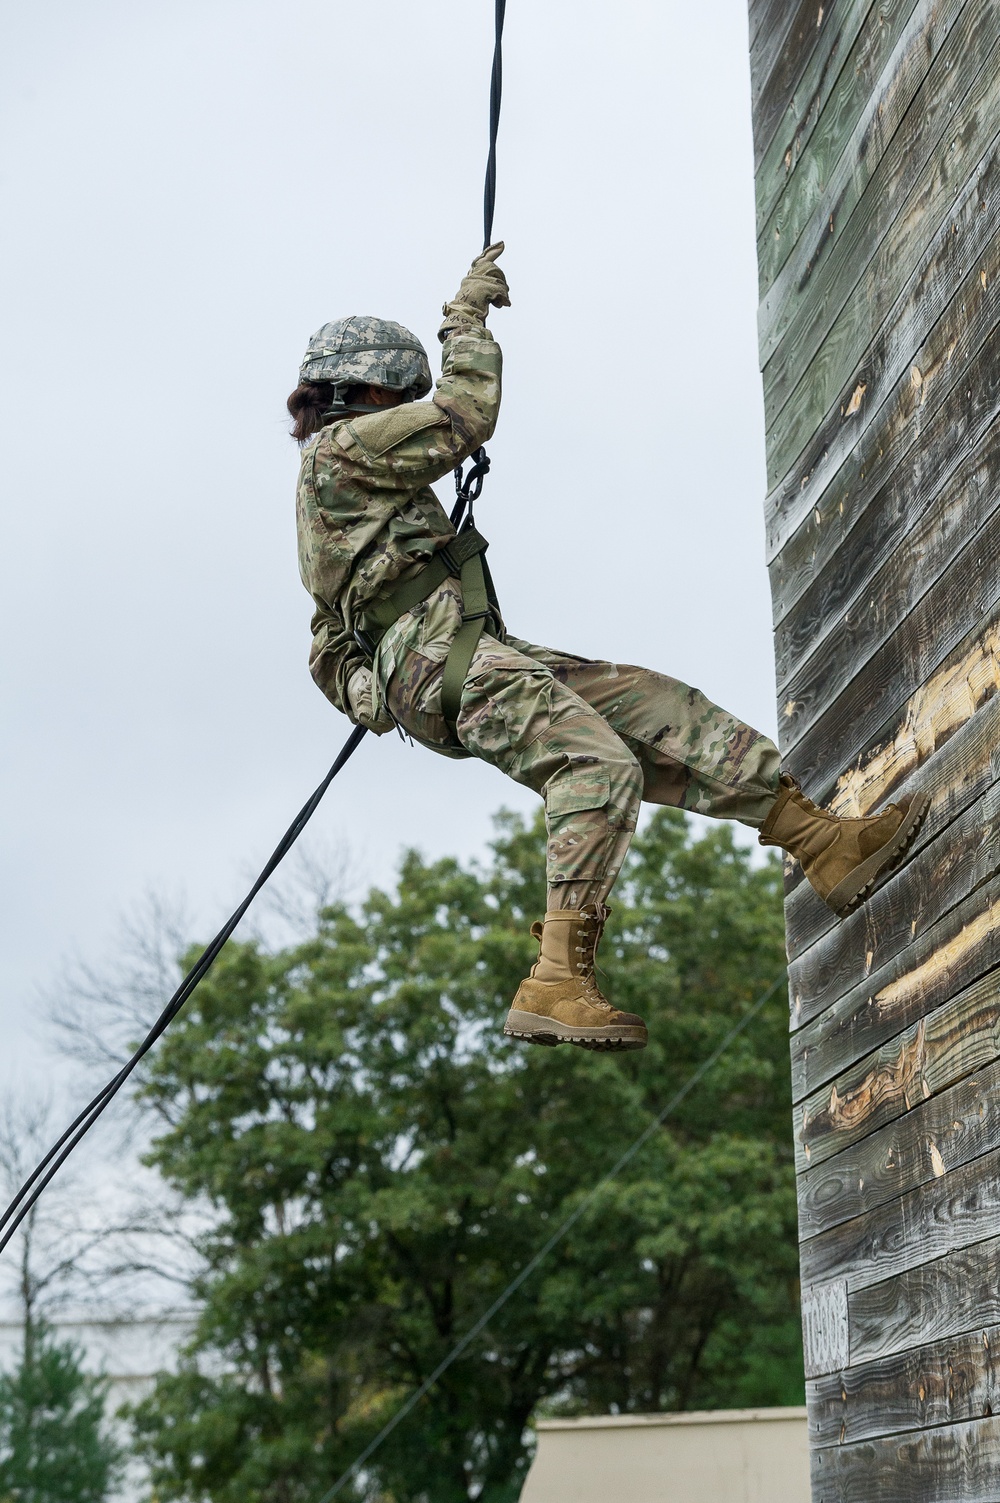 ROTC Madison Wisconsin Area students rappel and build teamwork on the confidence course at Total Force Training Center Ft. McCoy